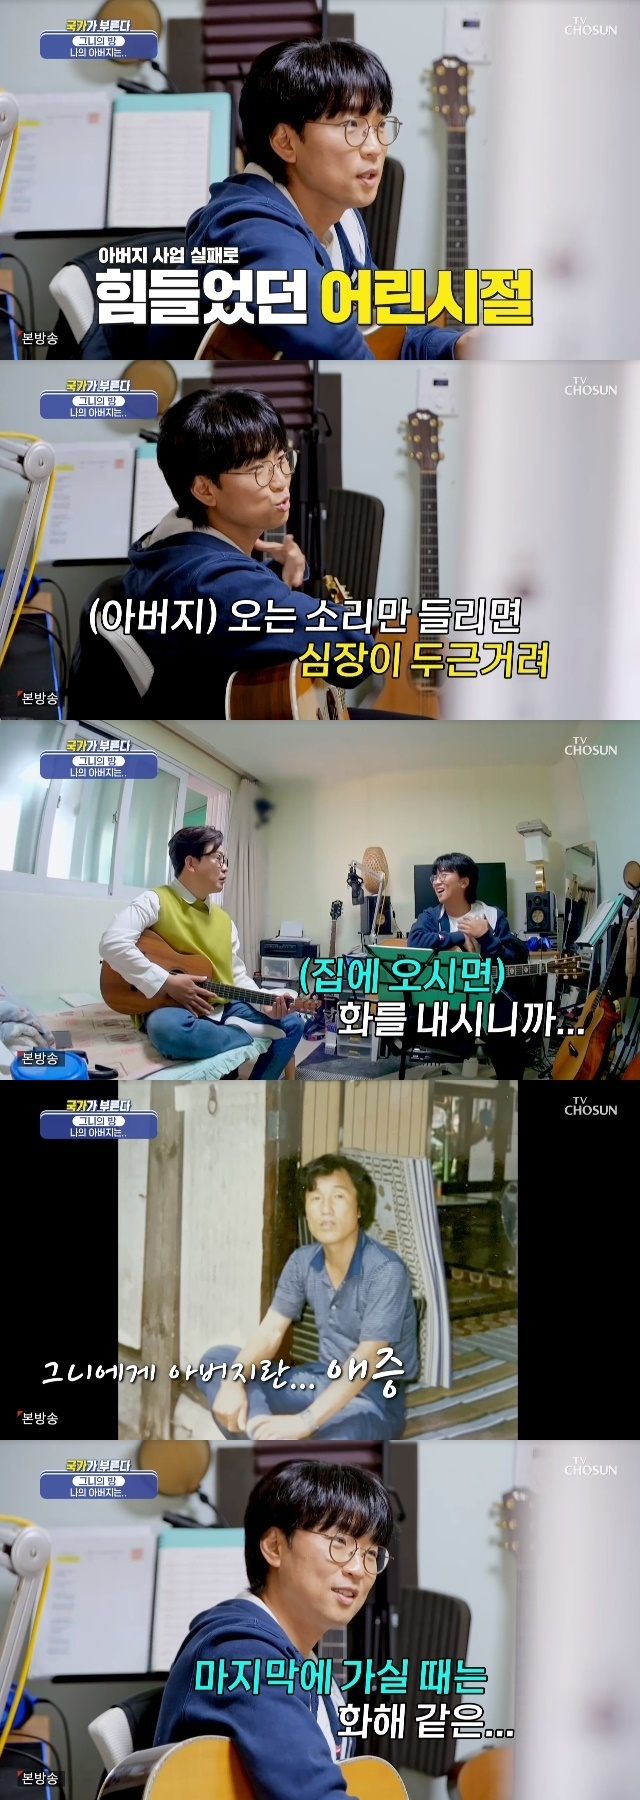 Chang-geun park, which received 300 million won in prize money, was still living in a 13-pyeong villa.He had time to get close to Kim Seong-joo and was embarrassed to reveal his family history with his father, who was stained with love.In the 9th episode of the TV Chosun entertainment Secret Agent Miss Oh (hereinafter referred to as Nationality Department) broadcast on April 14, Kim Seong-joo visited the house of chang-geun park.On this day, Kim Seong-joo found a villa without an elevator with a gift such as detergent and tissue paper.This is the house of Chang-geun park, the main character of 300 million prize money. Kim Seong-joo looked at the inside of the house with two rooms in 13 pyeong following the villa structure that had to go up the stairs.Kim Seong-joo also had a similar experience in the past when he had just arrived.Kim Seong-joo had a gift-opening time: not only detergents and tissues, but also blue and red underwear, as well as vocal cords that Lim Young-woong and Jang Min-Ho enjoyed.Kim Seong-joo told the chang-geun park, which misinterpreted vocal cords as sexual treatment drugs, Sex vocal cords, vocal cords, you will get a lot of help.I ate Jang Min-Ho and I ate Lim Young-woong and I knew everything. I had to introduce Chang-geun park. Chang-geun park said Kim Seong-joo was the first friend to come to his house and said, There is no friend in the neighborhood.Kim Seong-joo said that the two are not only the same age as the 1972 ones, but also the mothers age is similar. So we have similar mothers emotions and sons emotions.It fits too well, he appealed.Kim Seong-joo also revealed that he had attempted to speak to chang-geun park a few times: Isnt it hard to get next to you on the air?I said, No. and Kim Seong-joo said, So I thought he hated to talk. I only saw Sung-ju as a fan, and only my favorite pros come out, he said.It was an explanation that I felt so entertainer and star that I could not easily put my words.Eventually, the two people who put the horse on the occasion shared a consensus.Kim Seong-joo told the story of the chang-geun park, which came up to Seoul at the age of 40, I came up at 20, and when I first came up, I am very depressed.It was hard, so lonely and lonely, and I first came to Seoul and lived in Shinlim-dong. Kim Seong-joo then saw a table where Chang-geun park was presented to a fan and changed it. If you look at this prize, I saw the announcer test for five years.It was so hard that I thought of the house, so I went down (in my hometown) and (parents) suddenly my son came down.I ate the bean sprout soup and ate it quickly and I came up again (Seoul). There was this award in my house. So how great is the chang-geun park?I felt like I was going to die in five years, he said.Chang-geun park comforted Kim Seong-joo with a failure to I saw a drivers license test nine times.I realized then that I was really stupid, Chang-geun park said, and Kim Seong-joo wrapped up, I had a sense (lack) rather than stupid.They shared similar family history experiences.Kim Seong-joo commented that Chang-geun park was crying every time he sang, I do not really do anything else, but it is too hard to talk about my parents.My father, who was afraid of being a patriarch, died after a long illness of Parkinsons disease, but the time to go to work was over and the death was left untouched.Chang-geun park said, My father was going to do something and was kicked out because he could not do business.When I heard my father coming from the gate at night in a situation where something was not working, my heart pounded from then on.